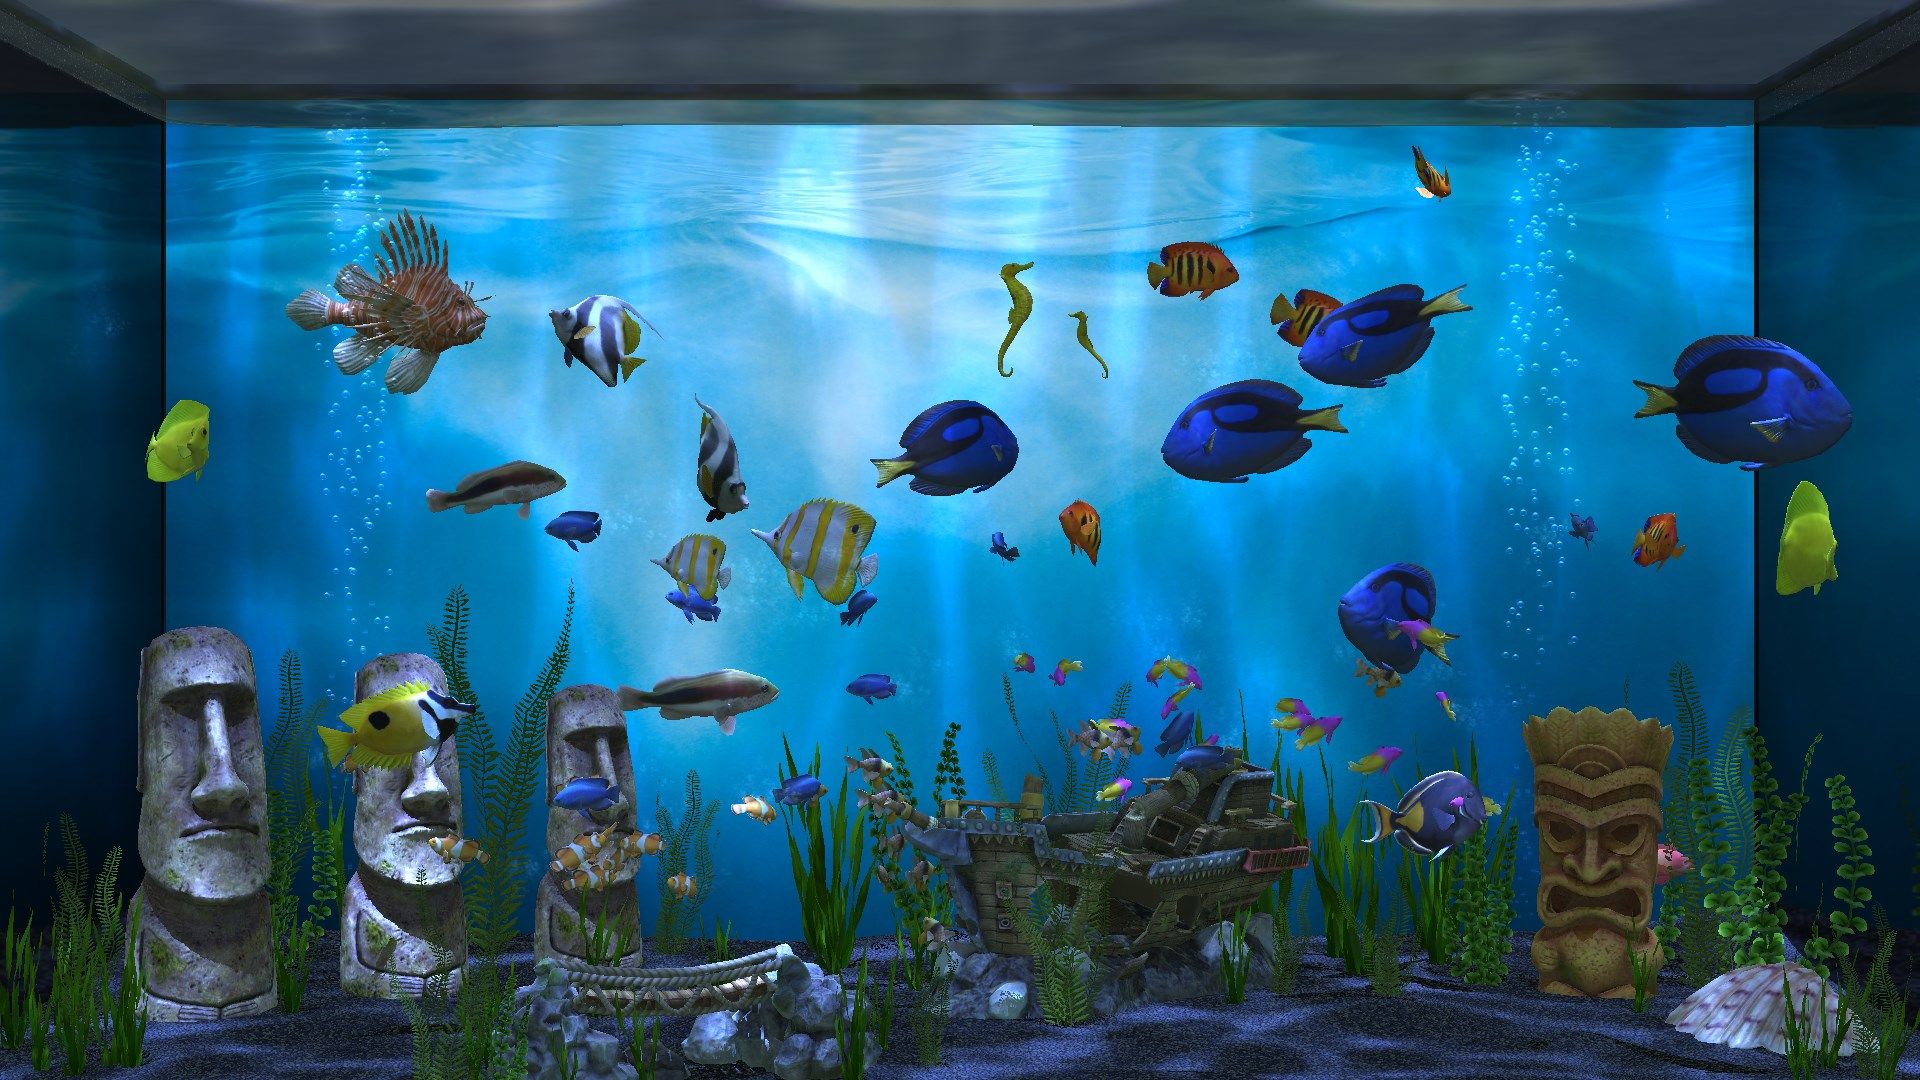 Rich aquariums with multiple ornaments, wallpapers and floors.